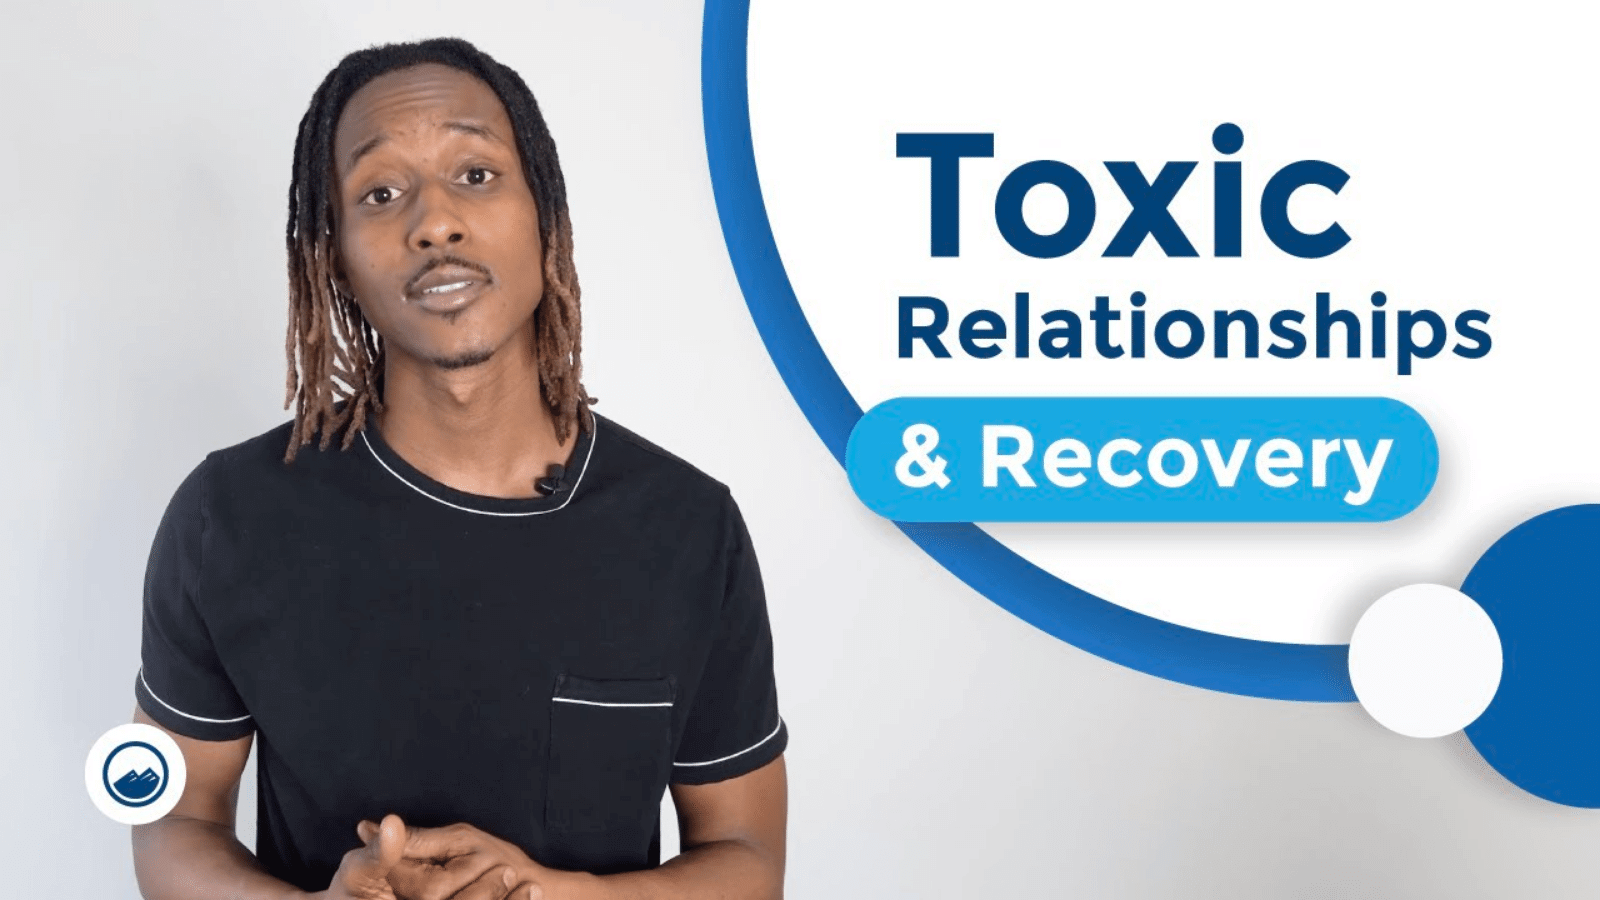 Image of Immanuel Jones explaining toxic relationships and recovery